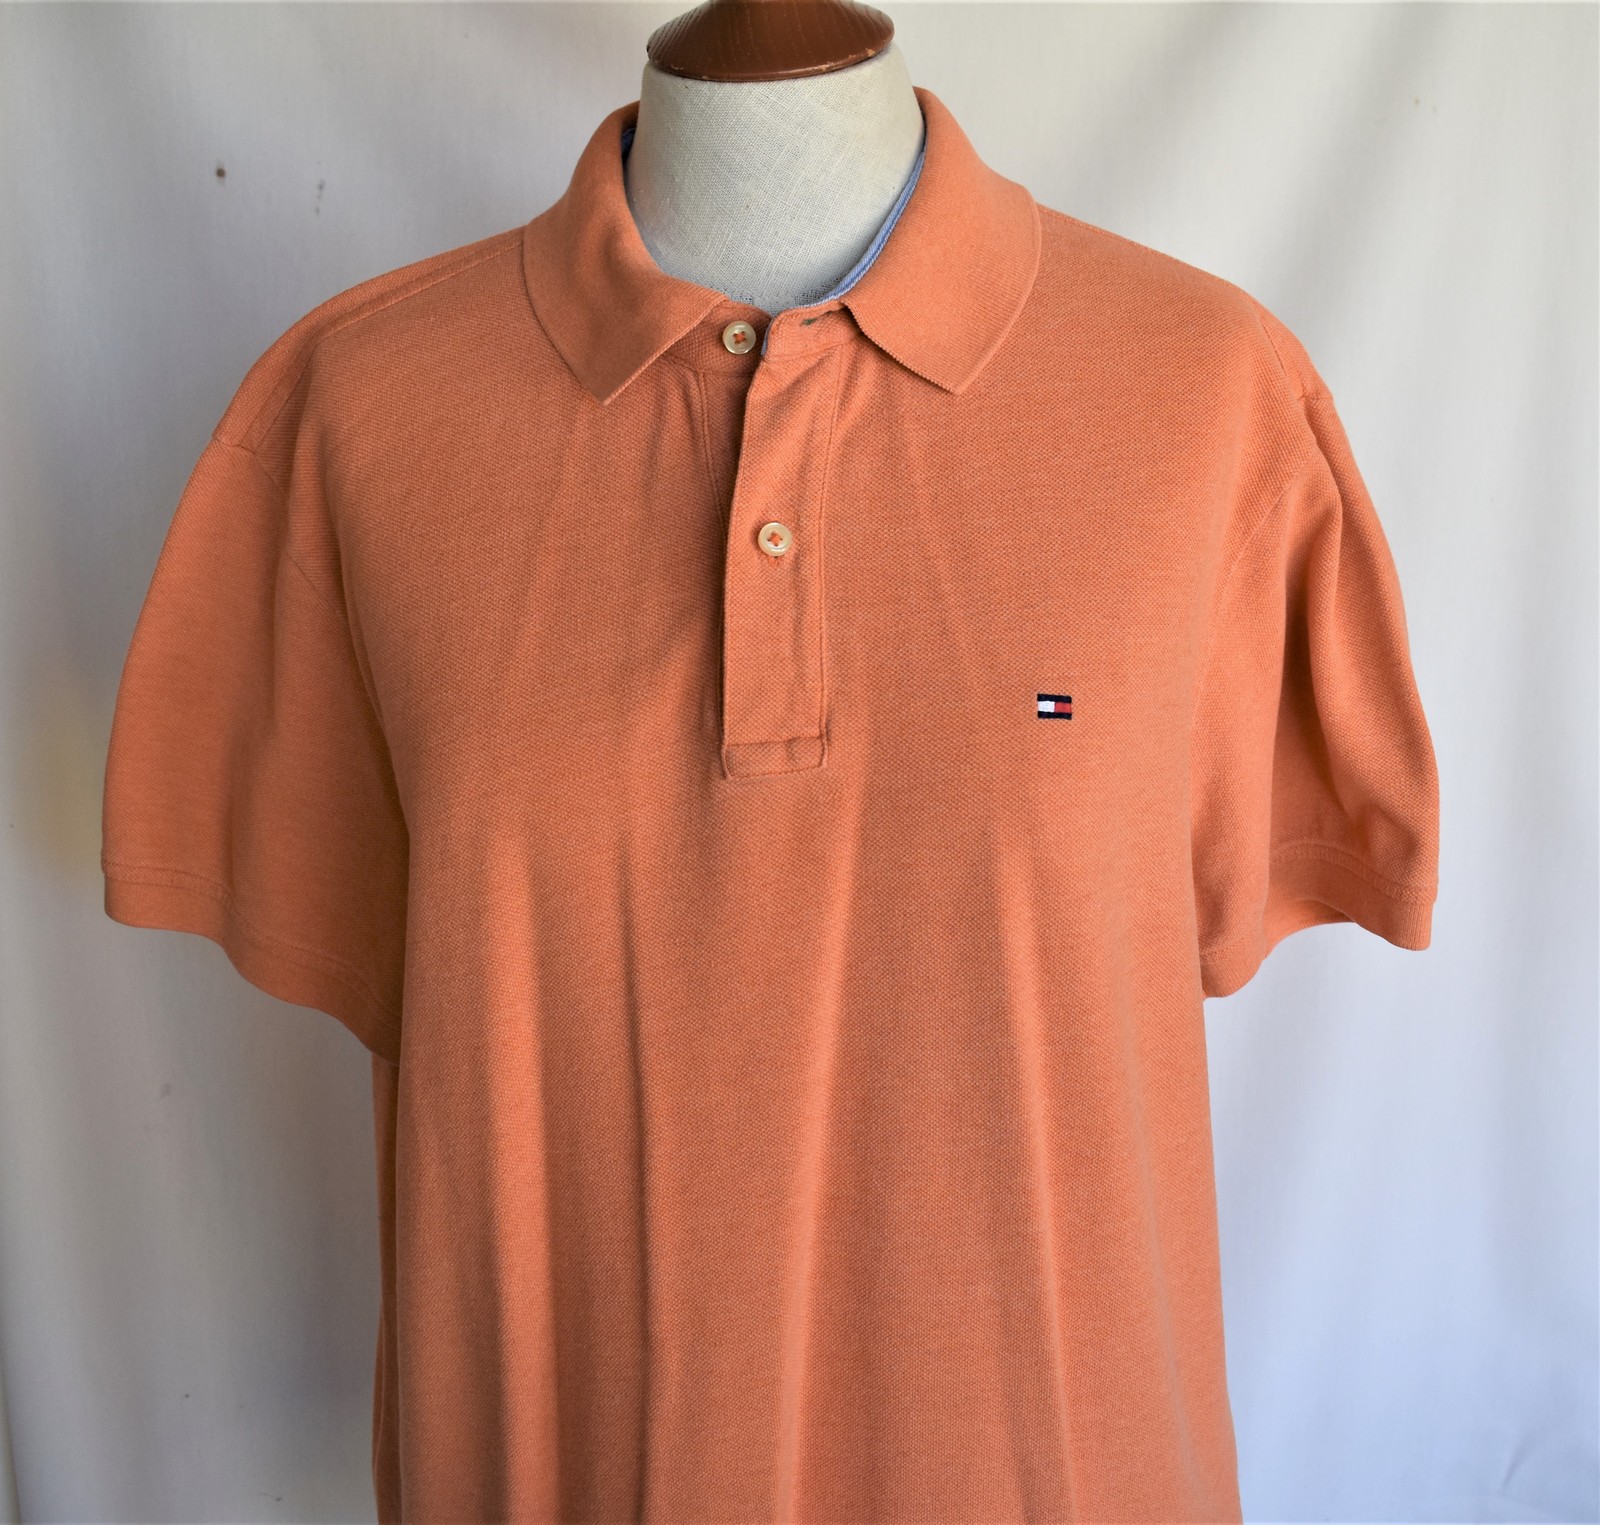 Tommy Hilfiger Golf Shirt Faded Orange M and similar items